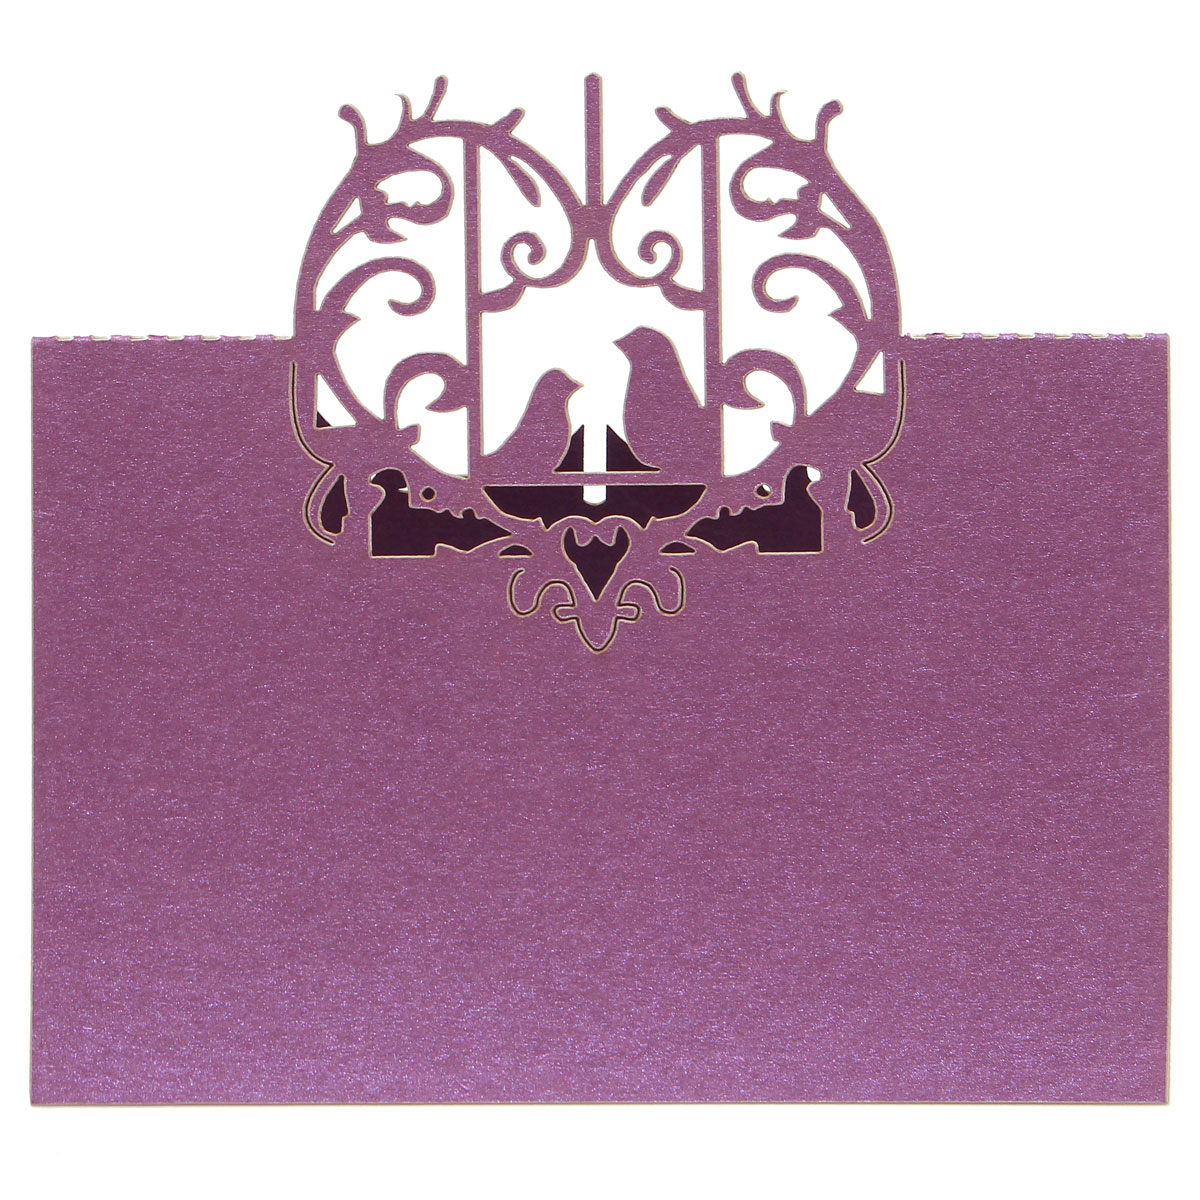 10Pcs-Laser-Cut-Love-Birds-Table-Name-Place-Cards-Wedding-Party-Favor-Gift-Accessories-1032681